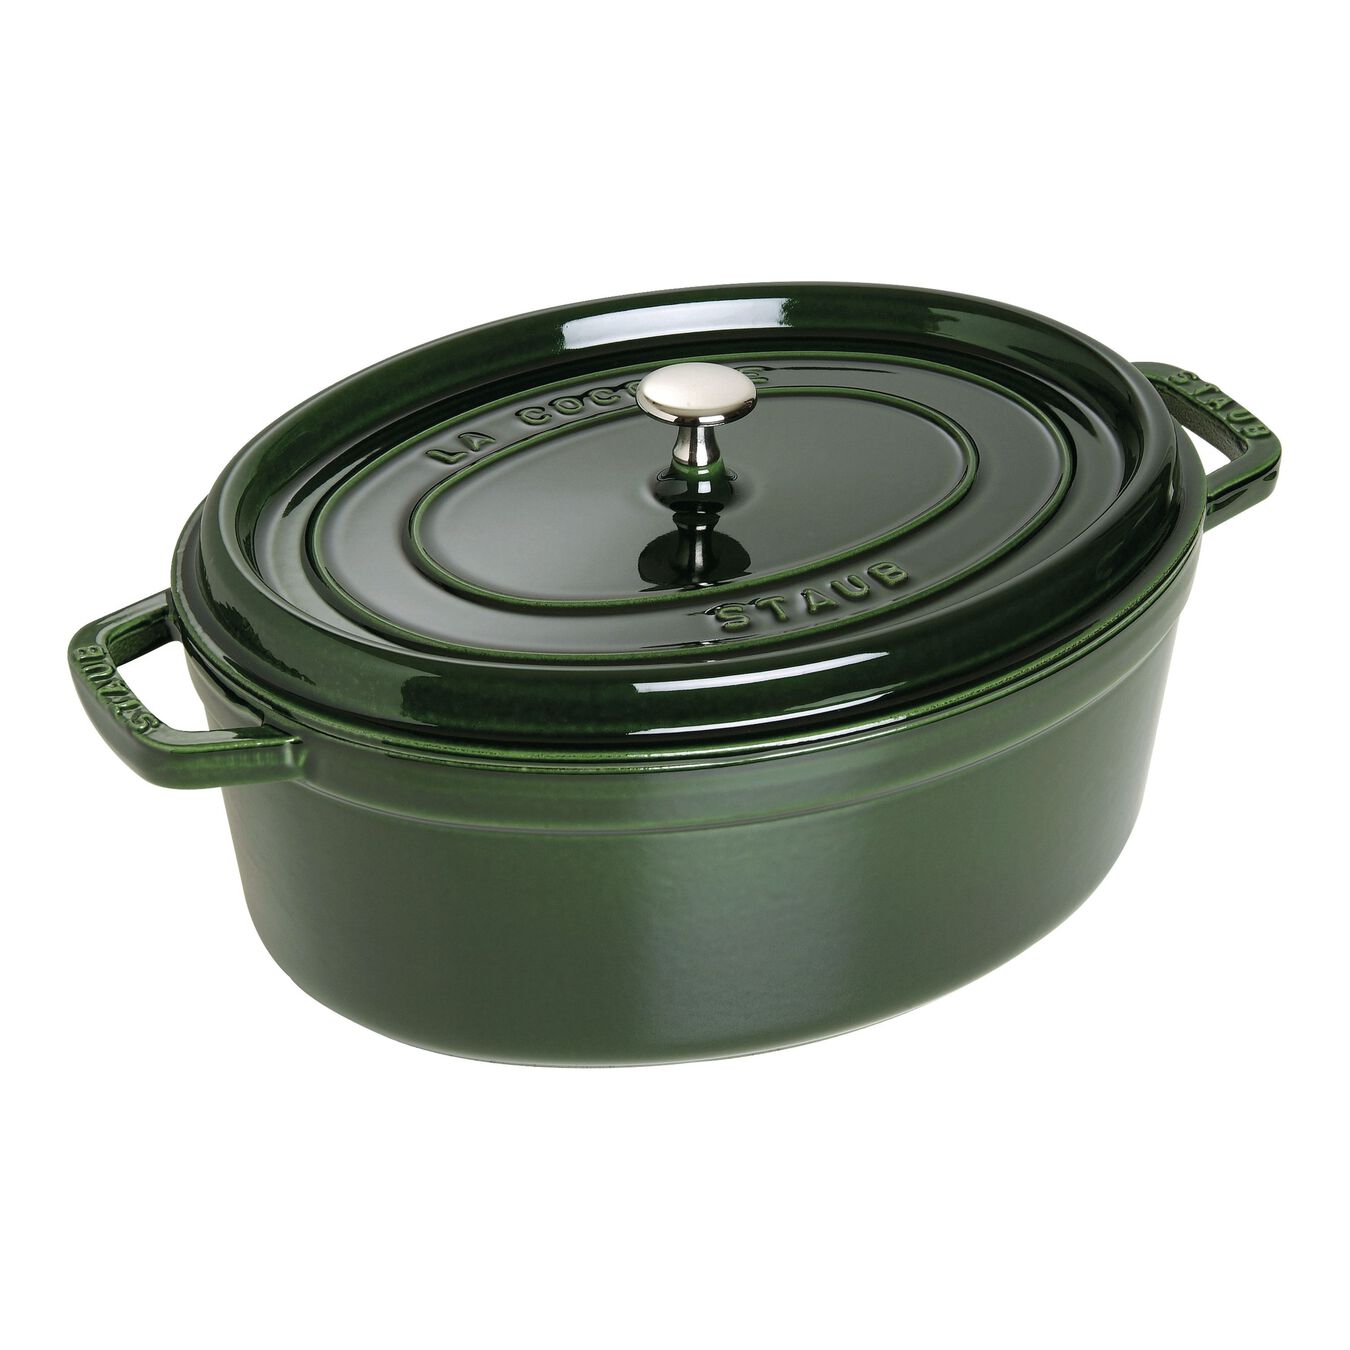 5.5 l cast iron oval Cocotte, basil-green,,large 1